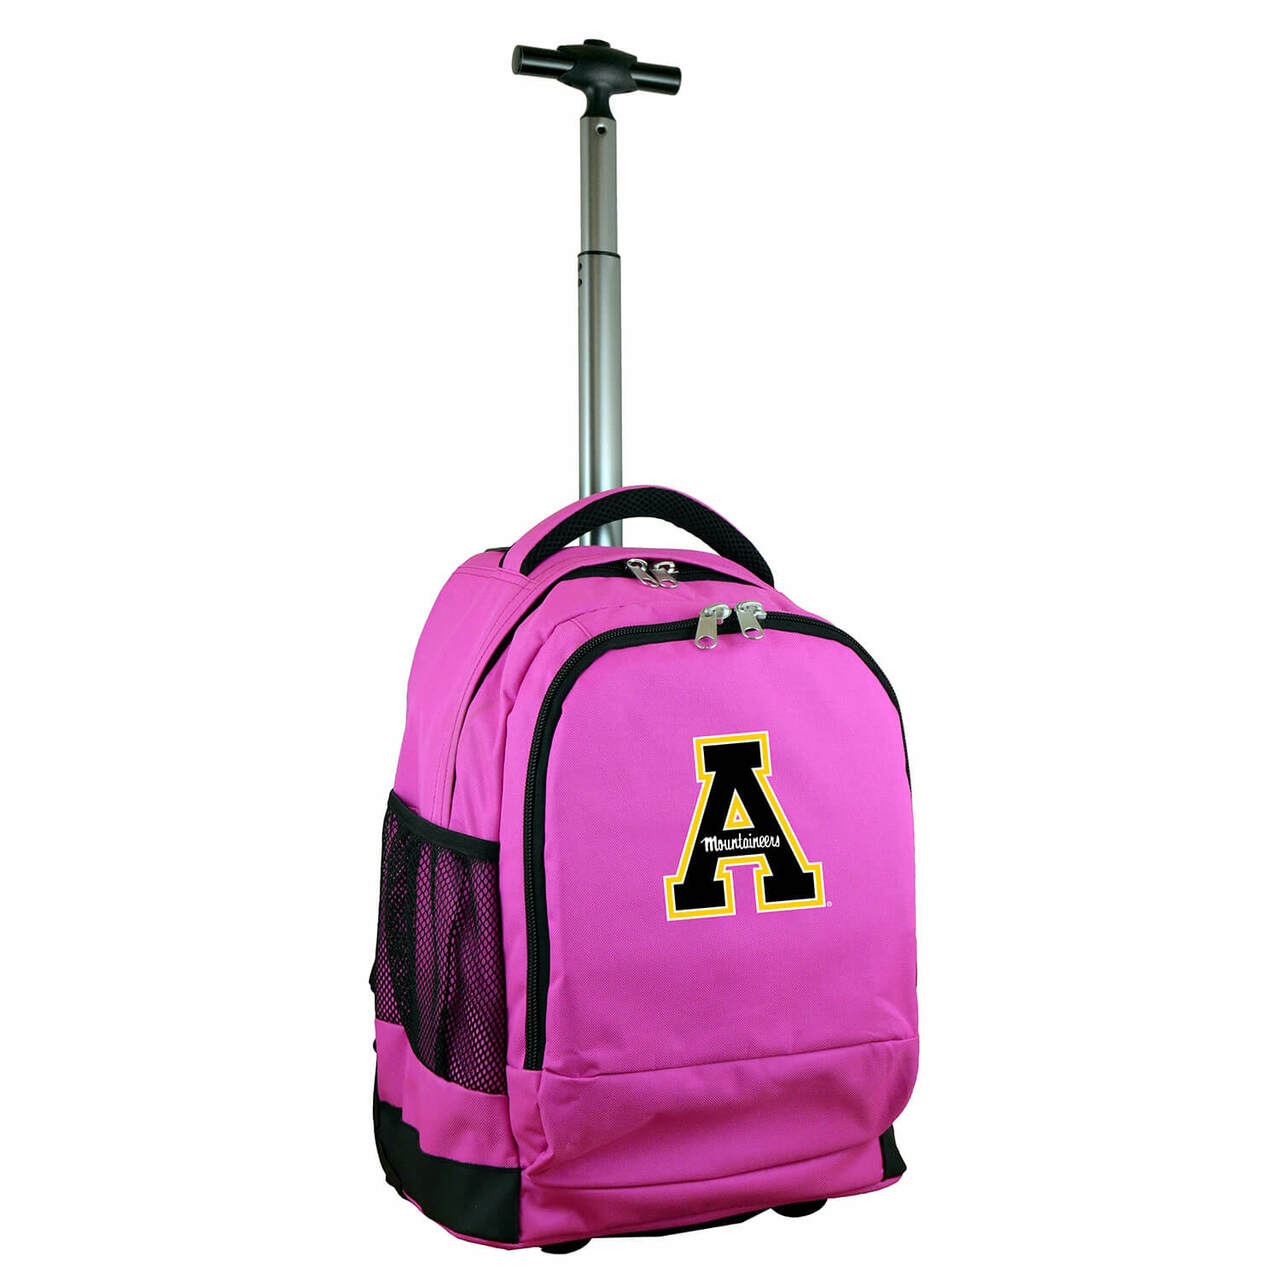 Appalachian State Mountaineers Premium Wheeled Backpack in Pink